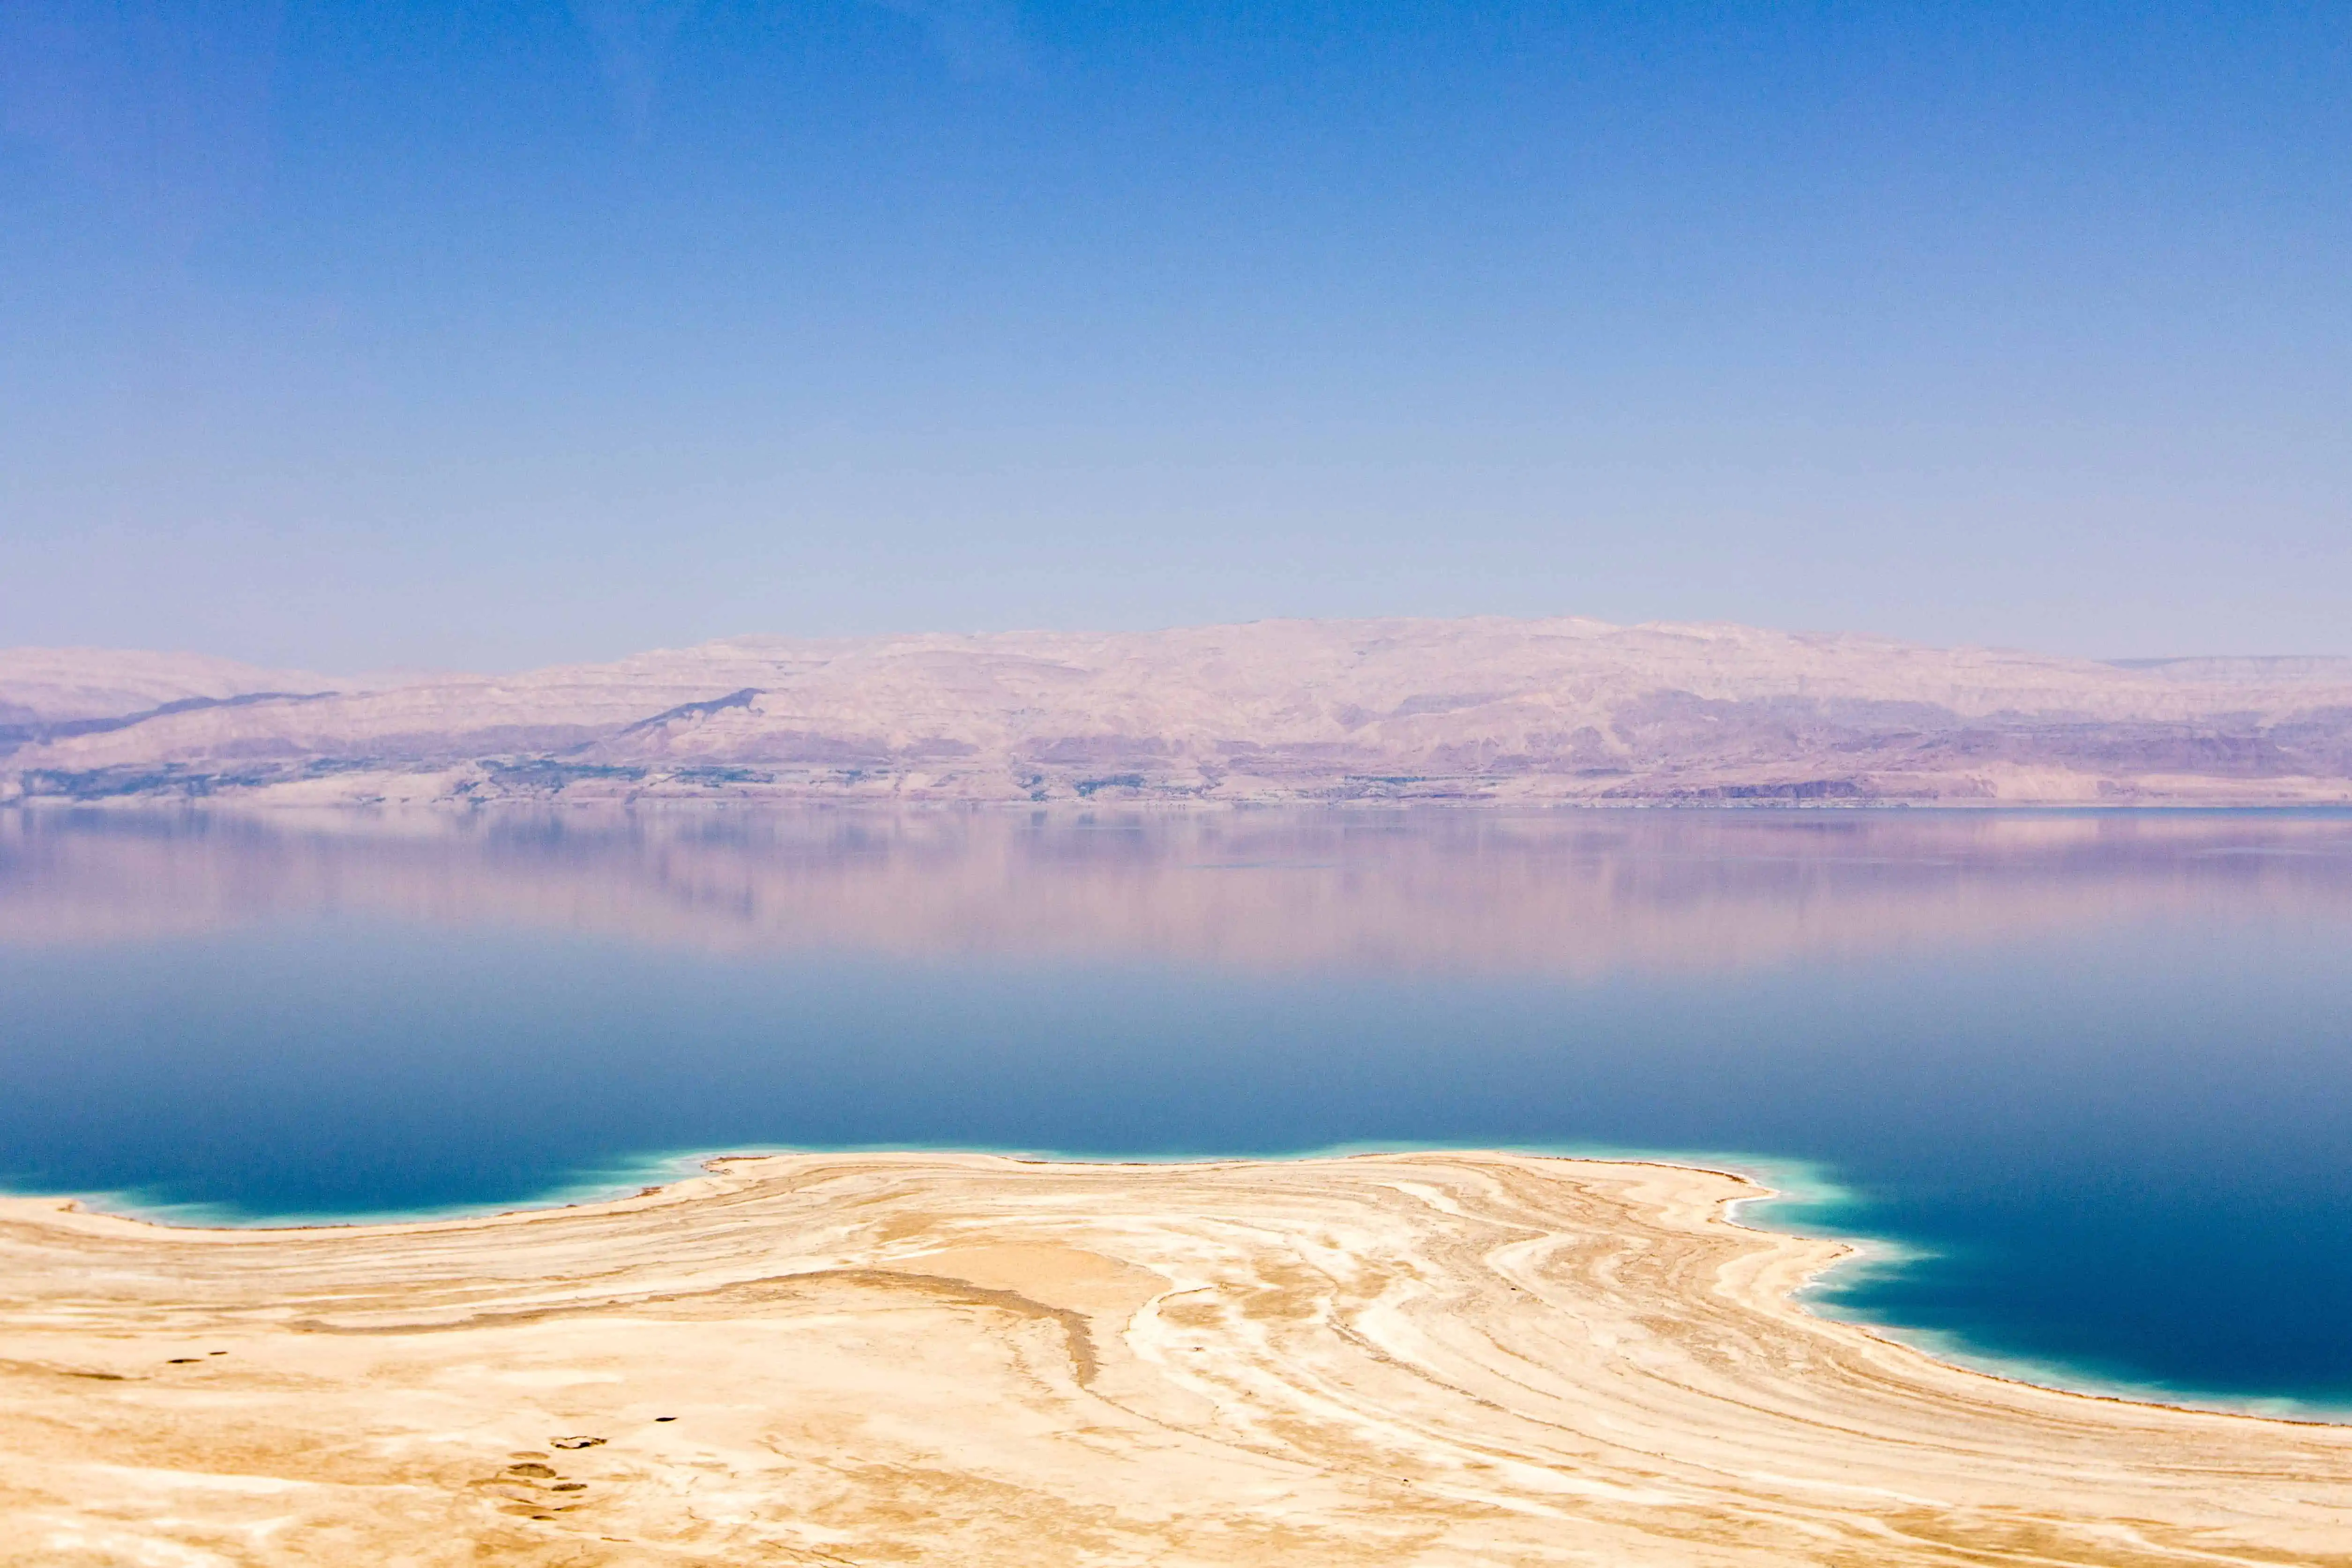 It's beautiful, this is my first trip to Israel, and Dead-sea is such amazing place. \unfortunately it's decreasing, I wish we can protect this amazing place.